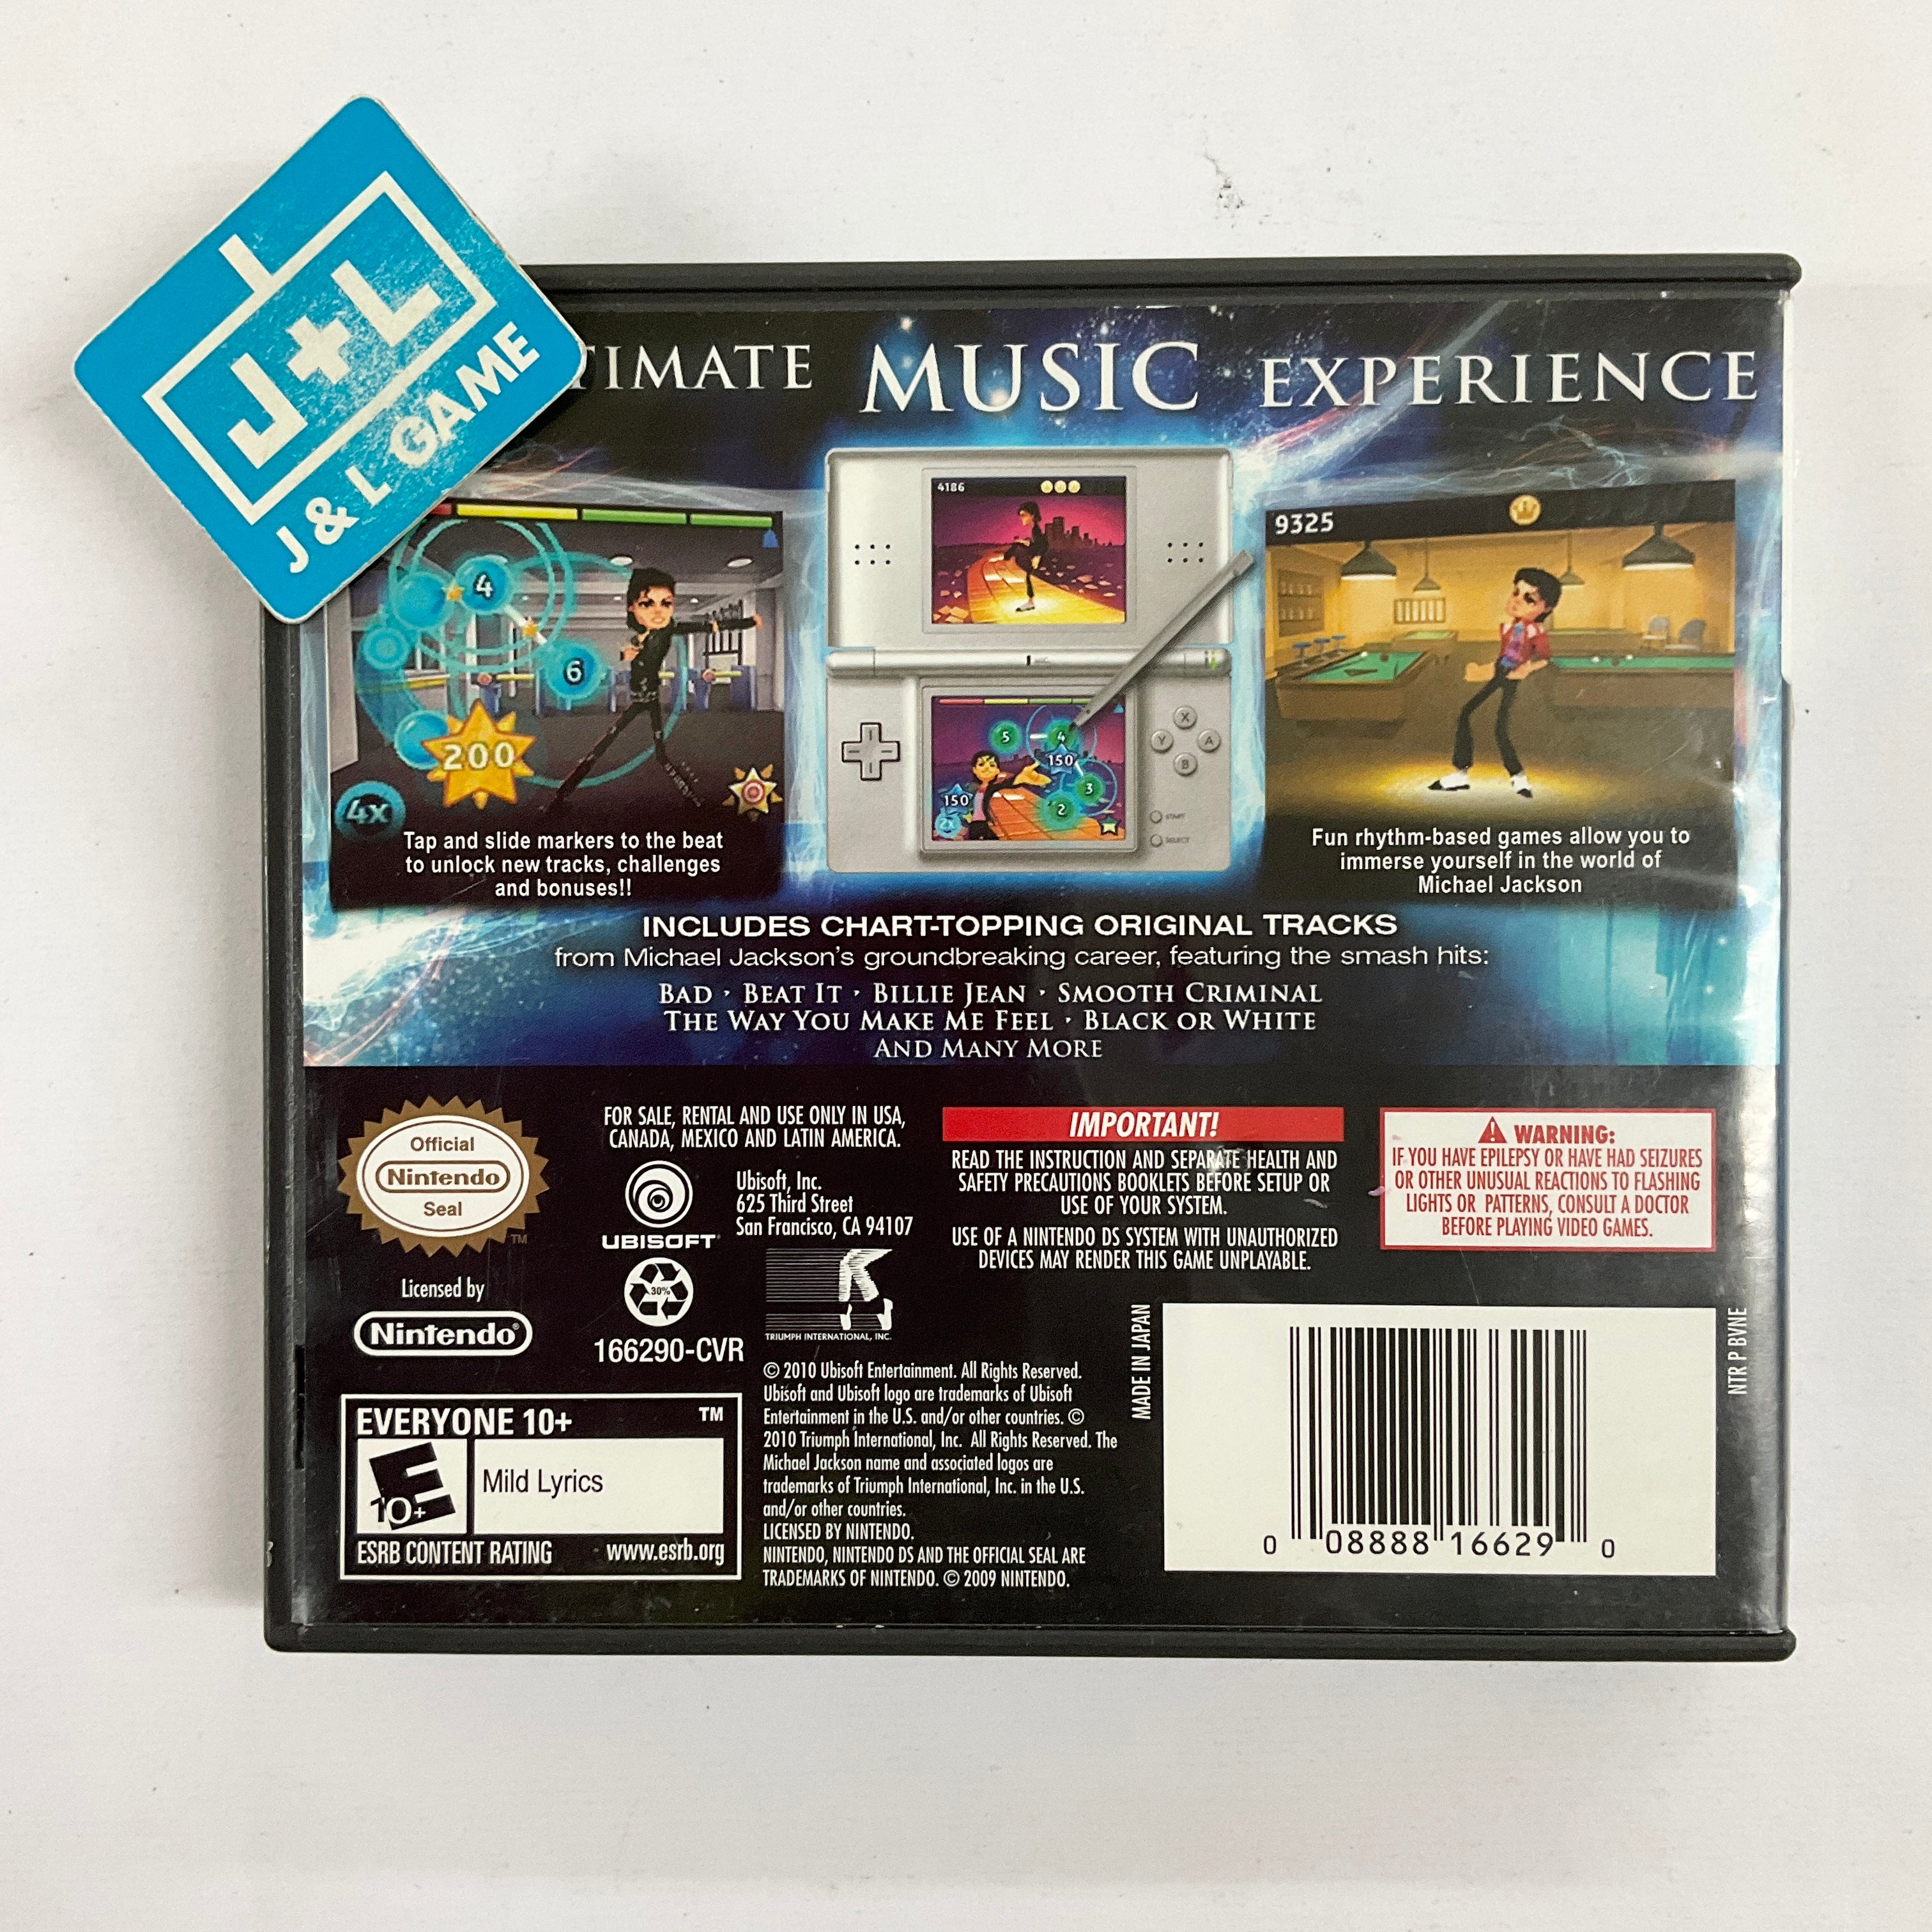 Michael Jackson: The Experience - (NDS) Nintendo DS [Pre-Owned] Video Games Ubisoft   